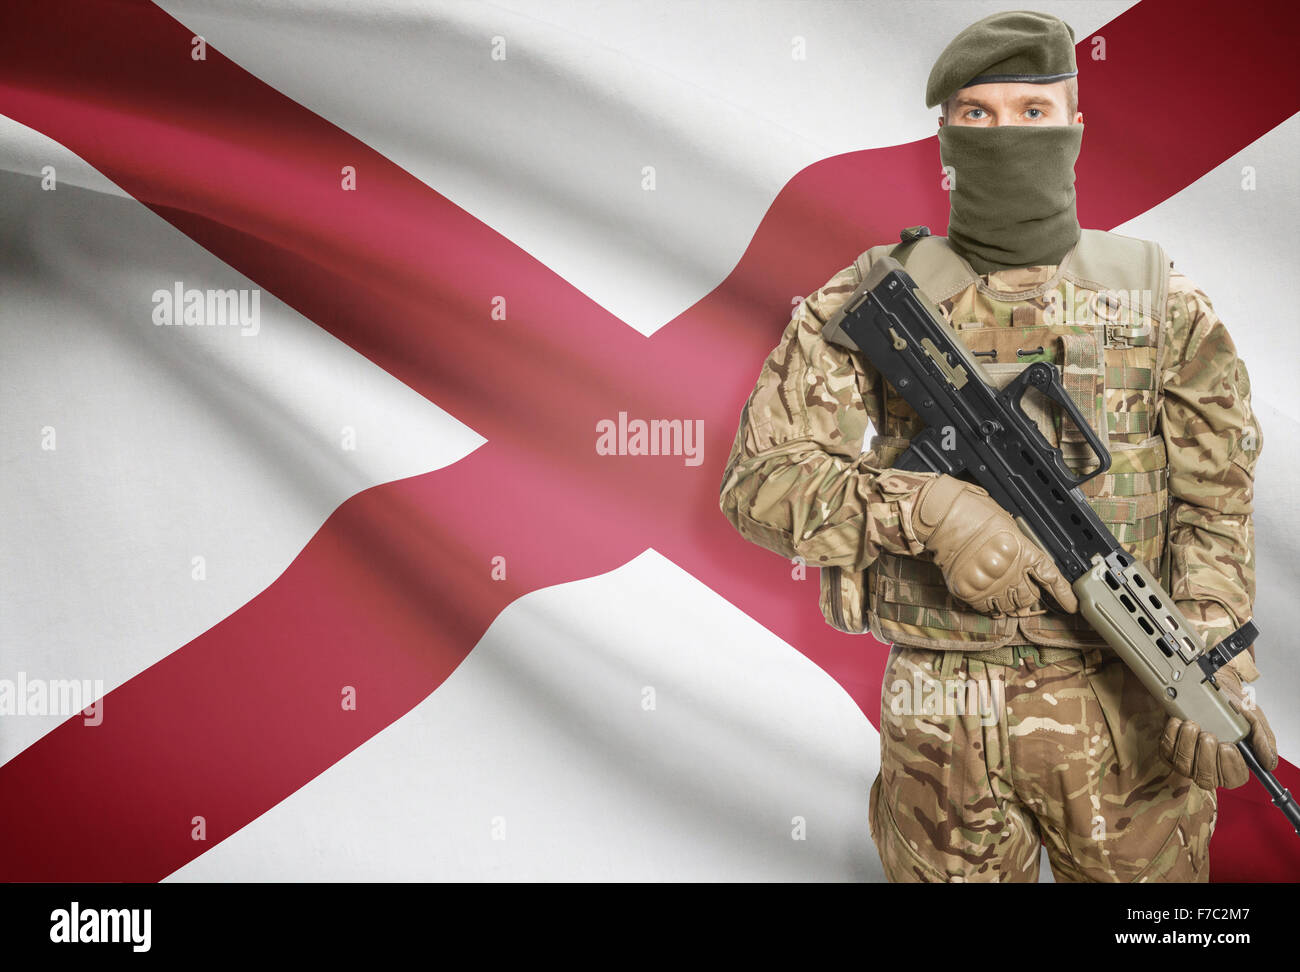 Soldier holding machine gun with USA state flag on background - Alabama Stock Photo